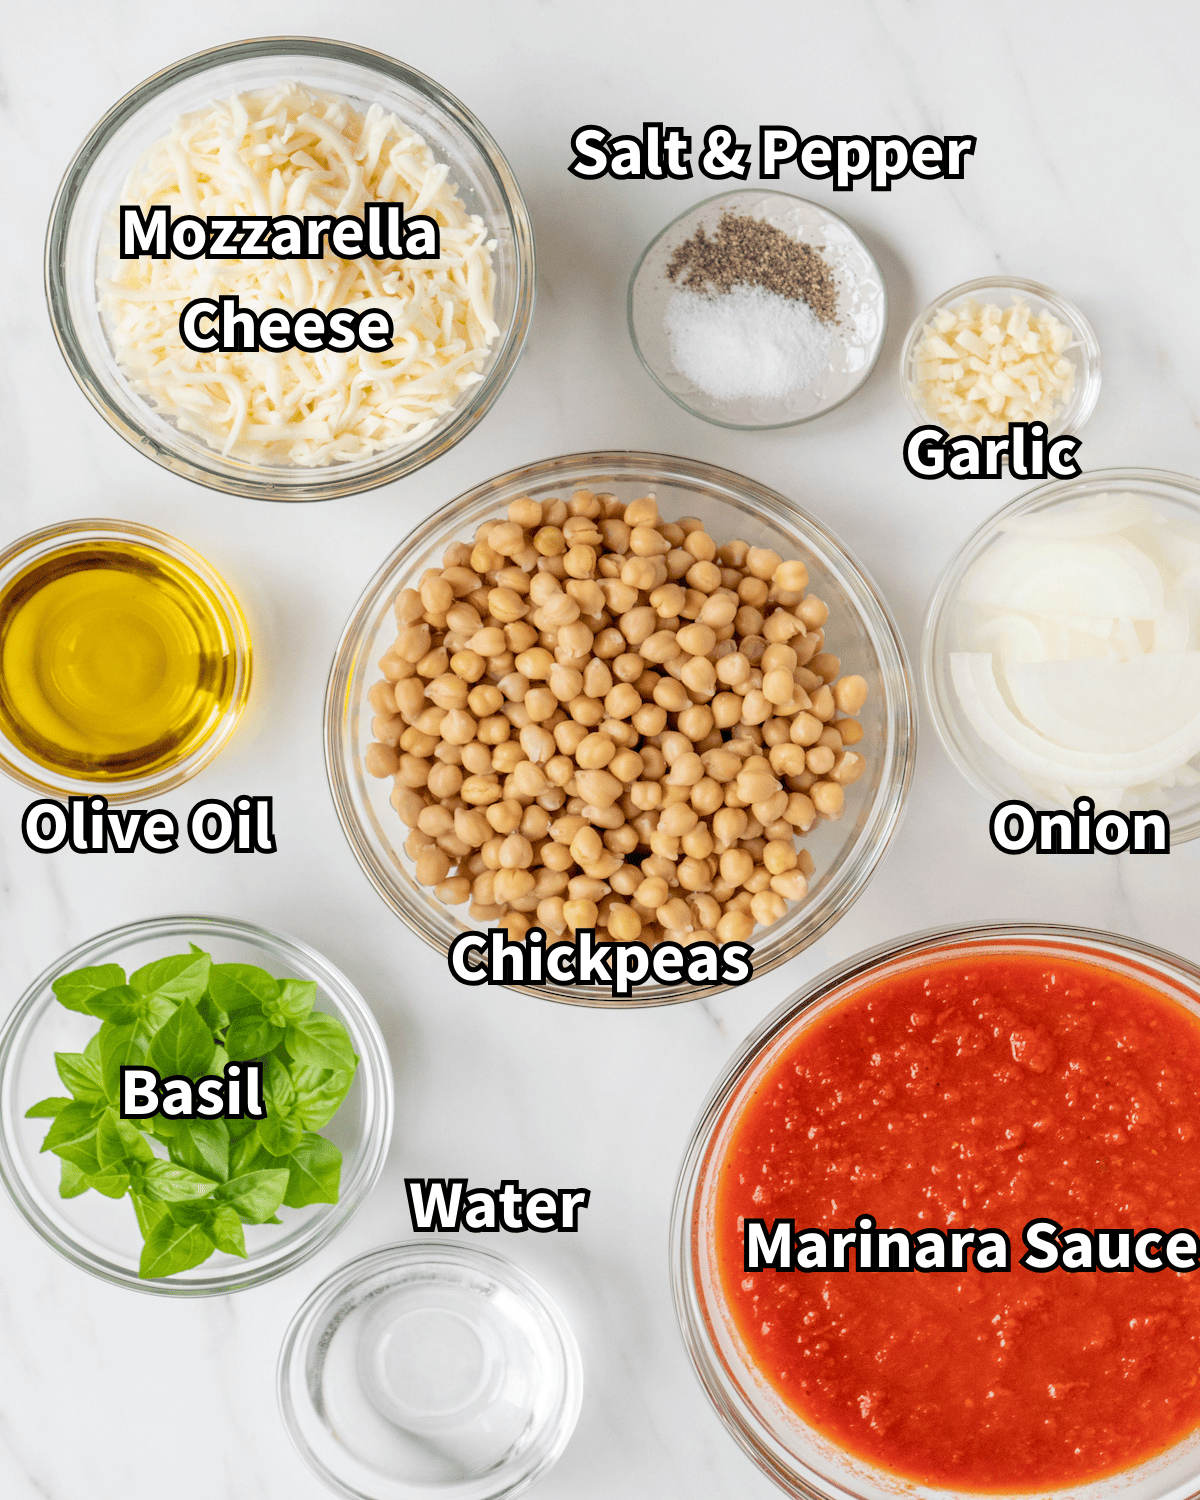 Skillet cheesy chickpeas recipe visual ingredients such as mozzarella cheese, basil, olive oil, garlic, salt & pepper, chickpeas, marinara sauce, water, and onion